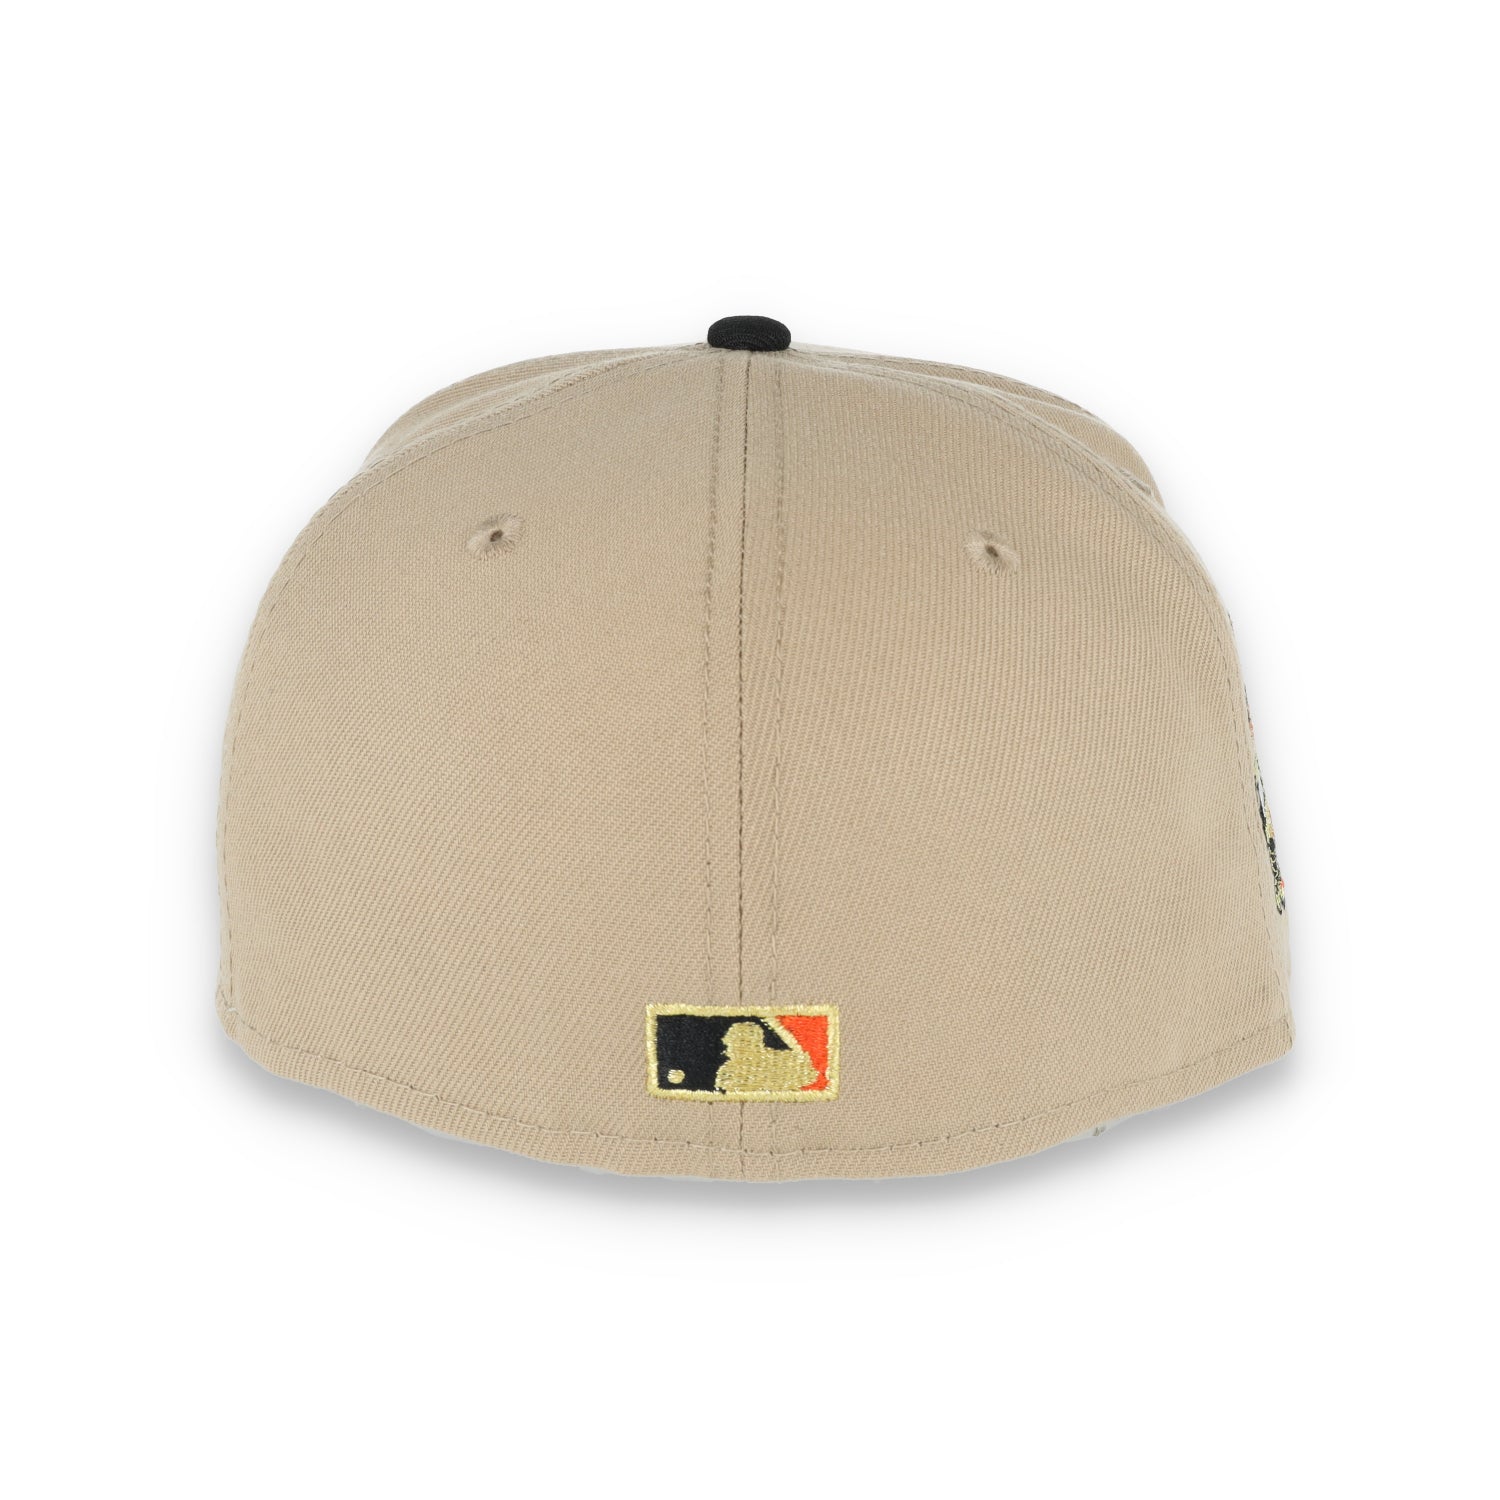 New Era San Francisco Giants 2000 Inaugural Season Side Patch 59FIFTY Fitted Khaki Hat